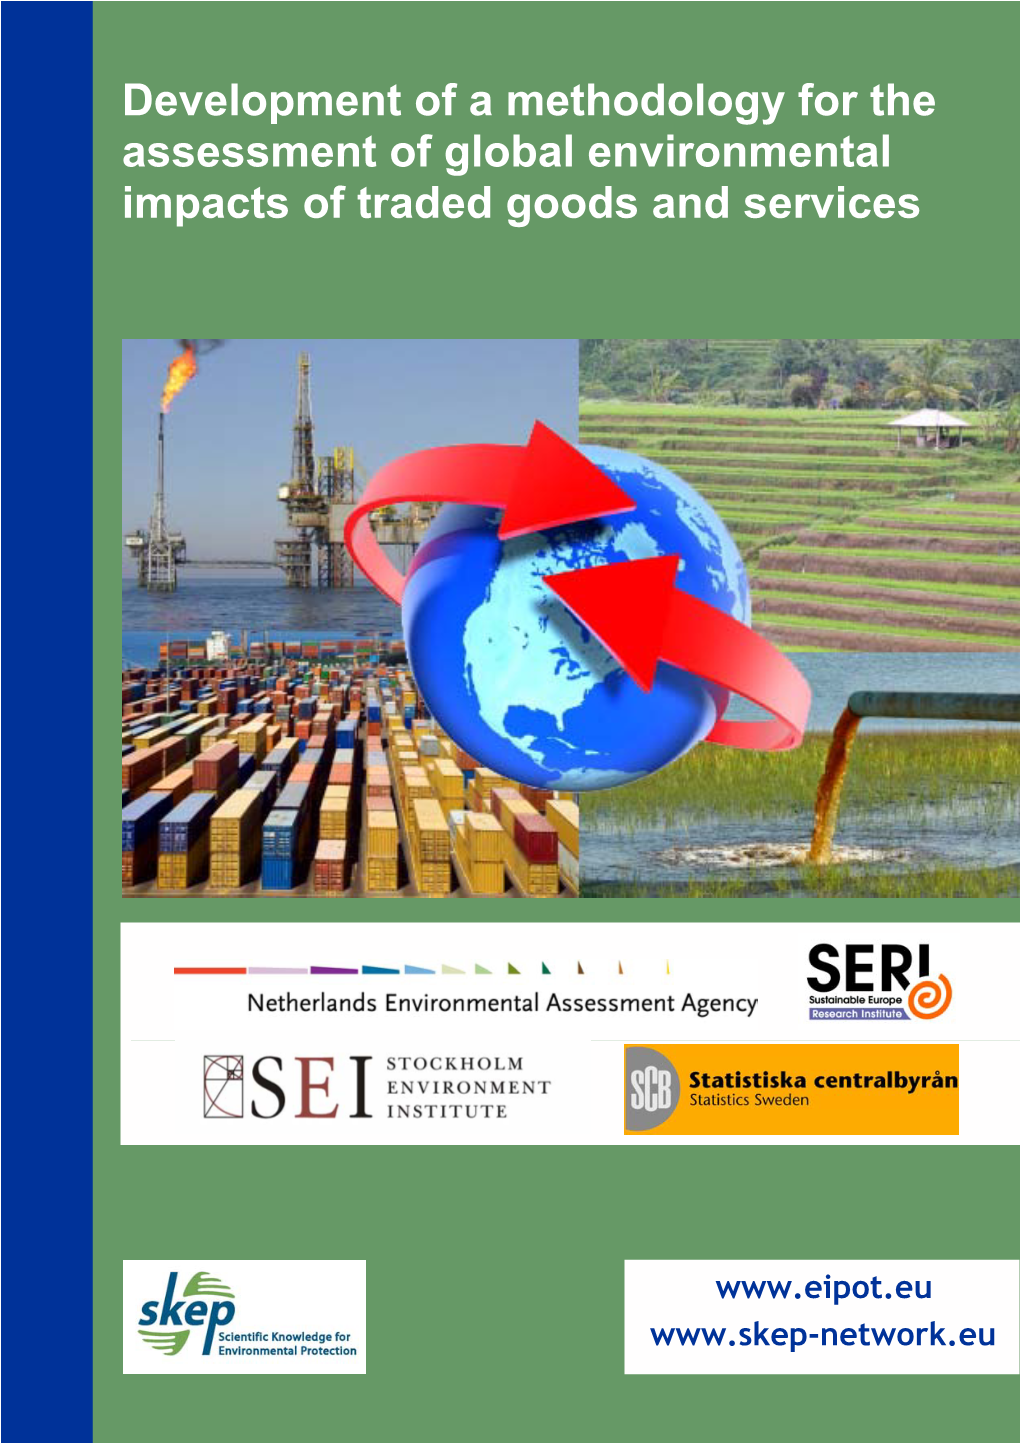 Development of a Methodology for the Assessment of Global Environmental Impacts of Traded Goods and Services